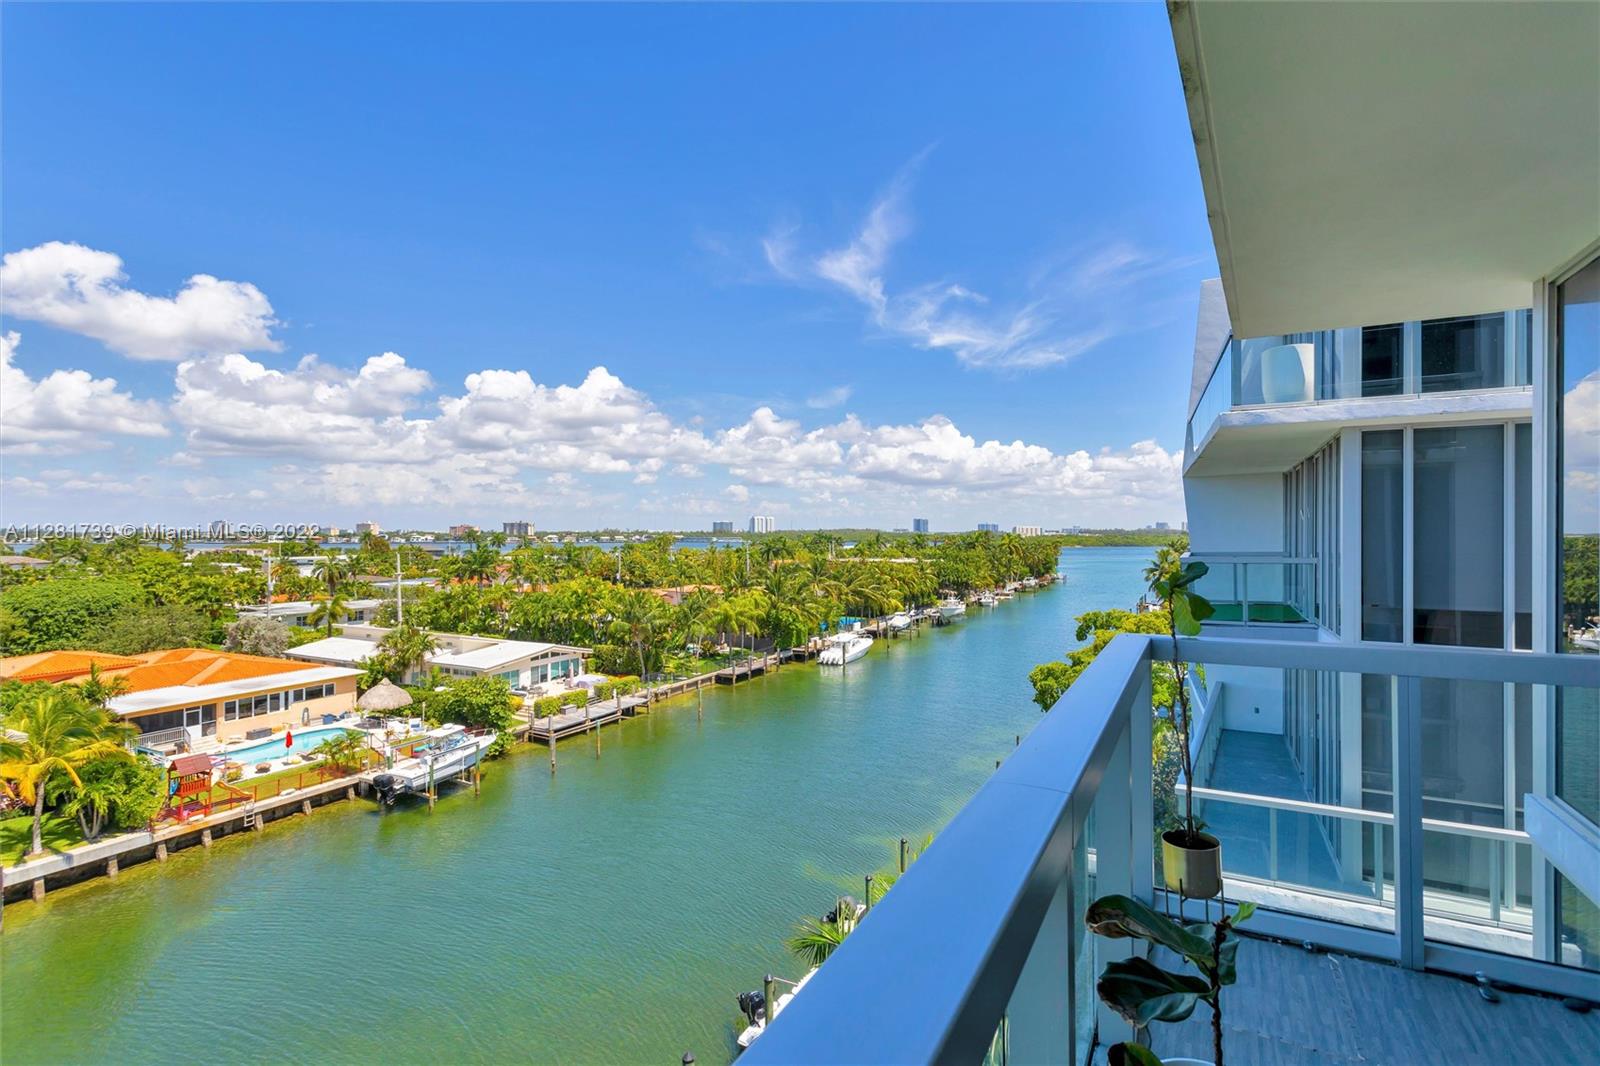 Price to sell. With 10' floor-to-ceiling windows offering breathtaking panoramic views of Biscayne Bay and multimillion-dollar residences, this charming west-facing corner unit boasts 2 beds, 2 baths, a den, and assigned 24' marina slip. Enjoy MiaCucina cabinetry, Bosch appliances, and quartz countertops in the kitchen, along with ceramic white floors throughout the unit. Relax in the marble-floored master bath or fashionable-tiled second bath. Designed by Arquitectonica, Kai at Bay Harbor is a boutique 7-story condo featuring a rooftop infinity pool and 4 BBQ areas. Includes 2 tandem parking spaces. Don't miss this exceptional opportunity.